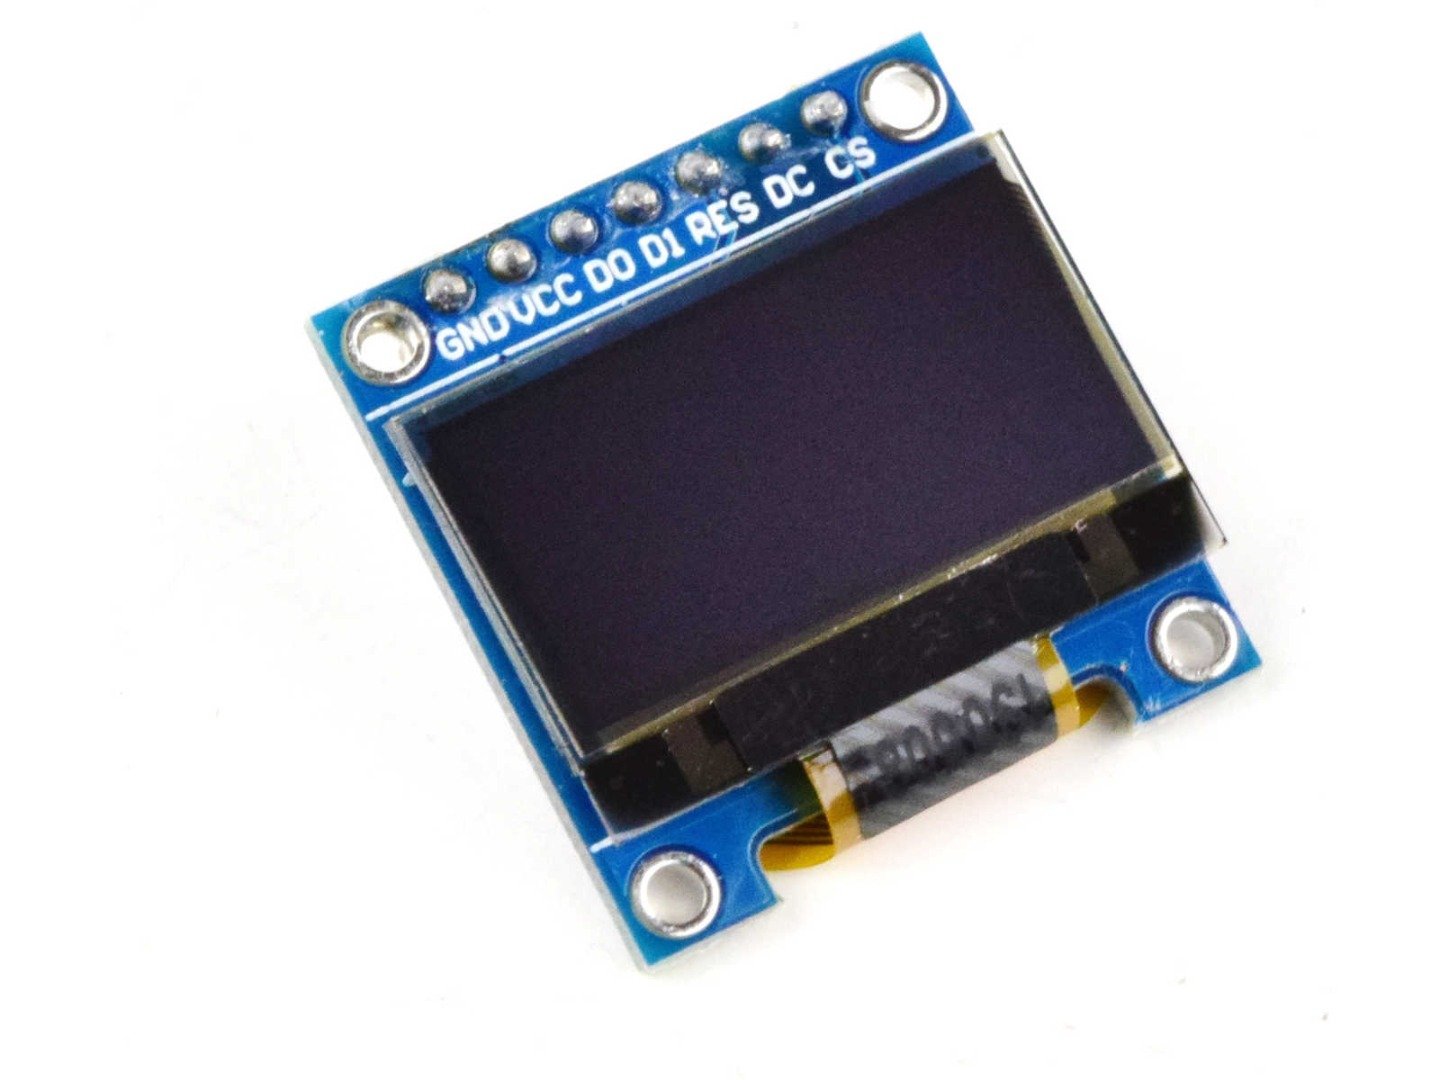 OLED Display 0.96 inch 128×64 with SPI interface – 3-5V (100% compatible with Arduino) 7